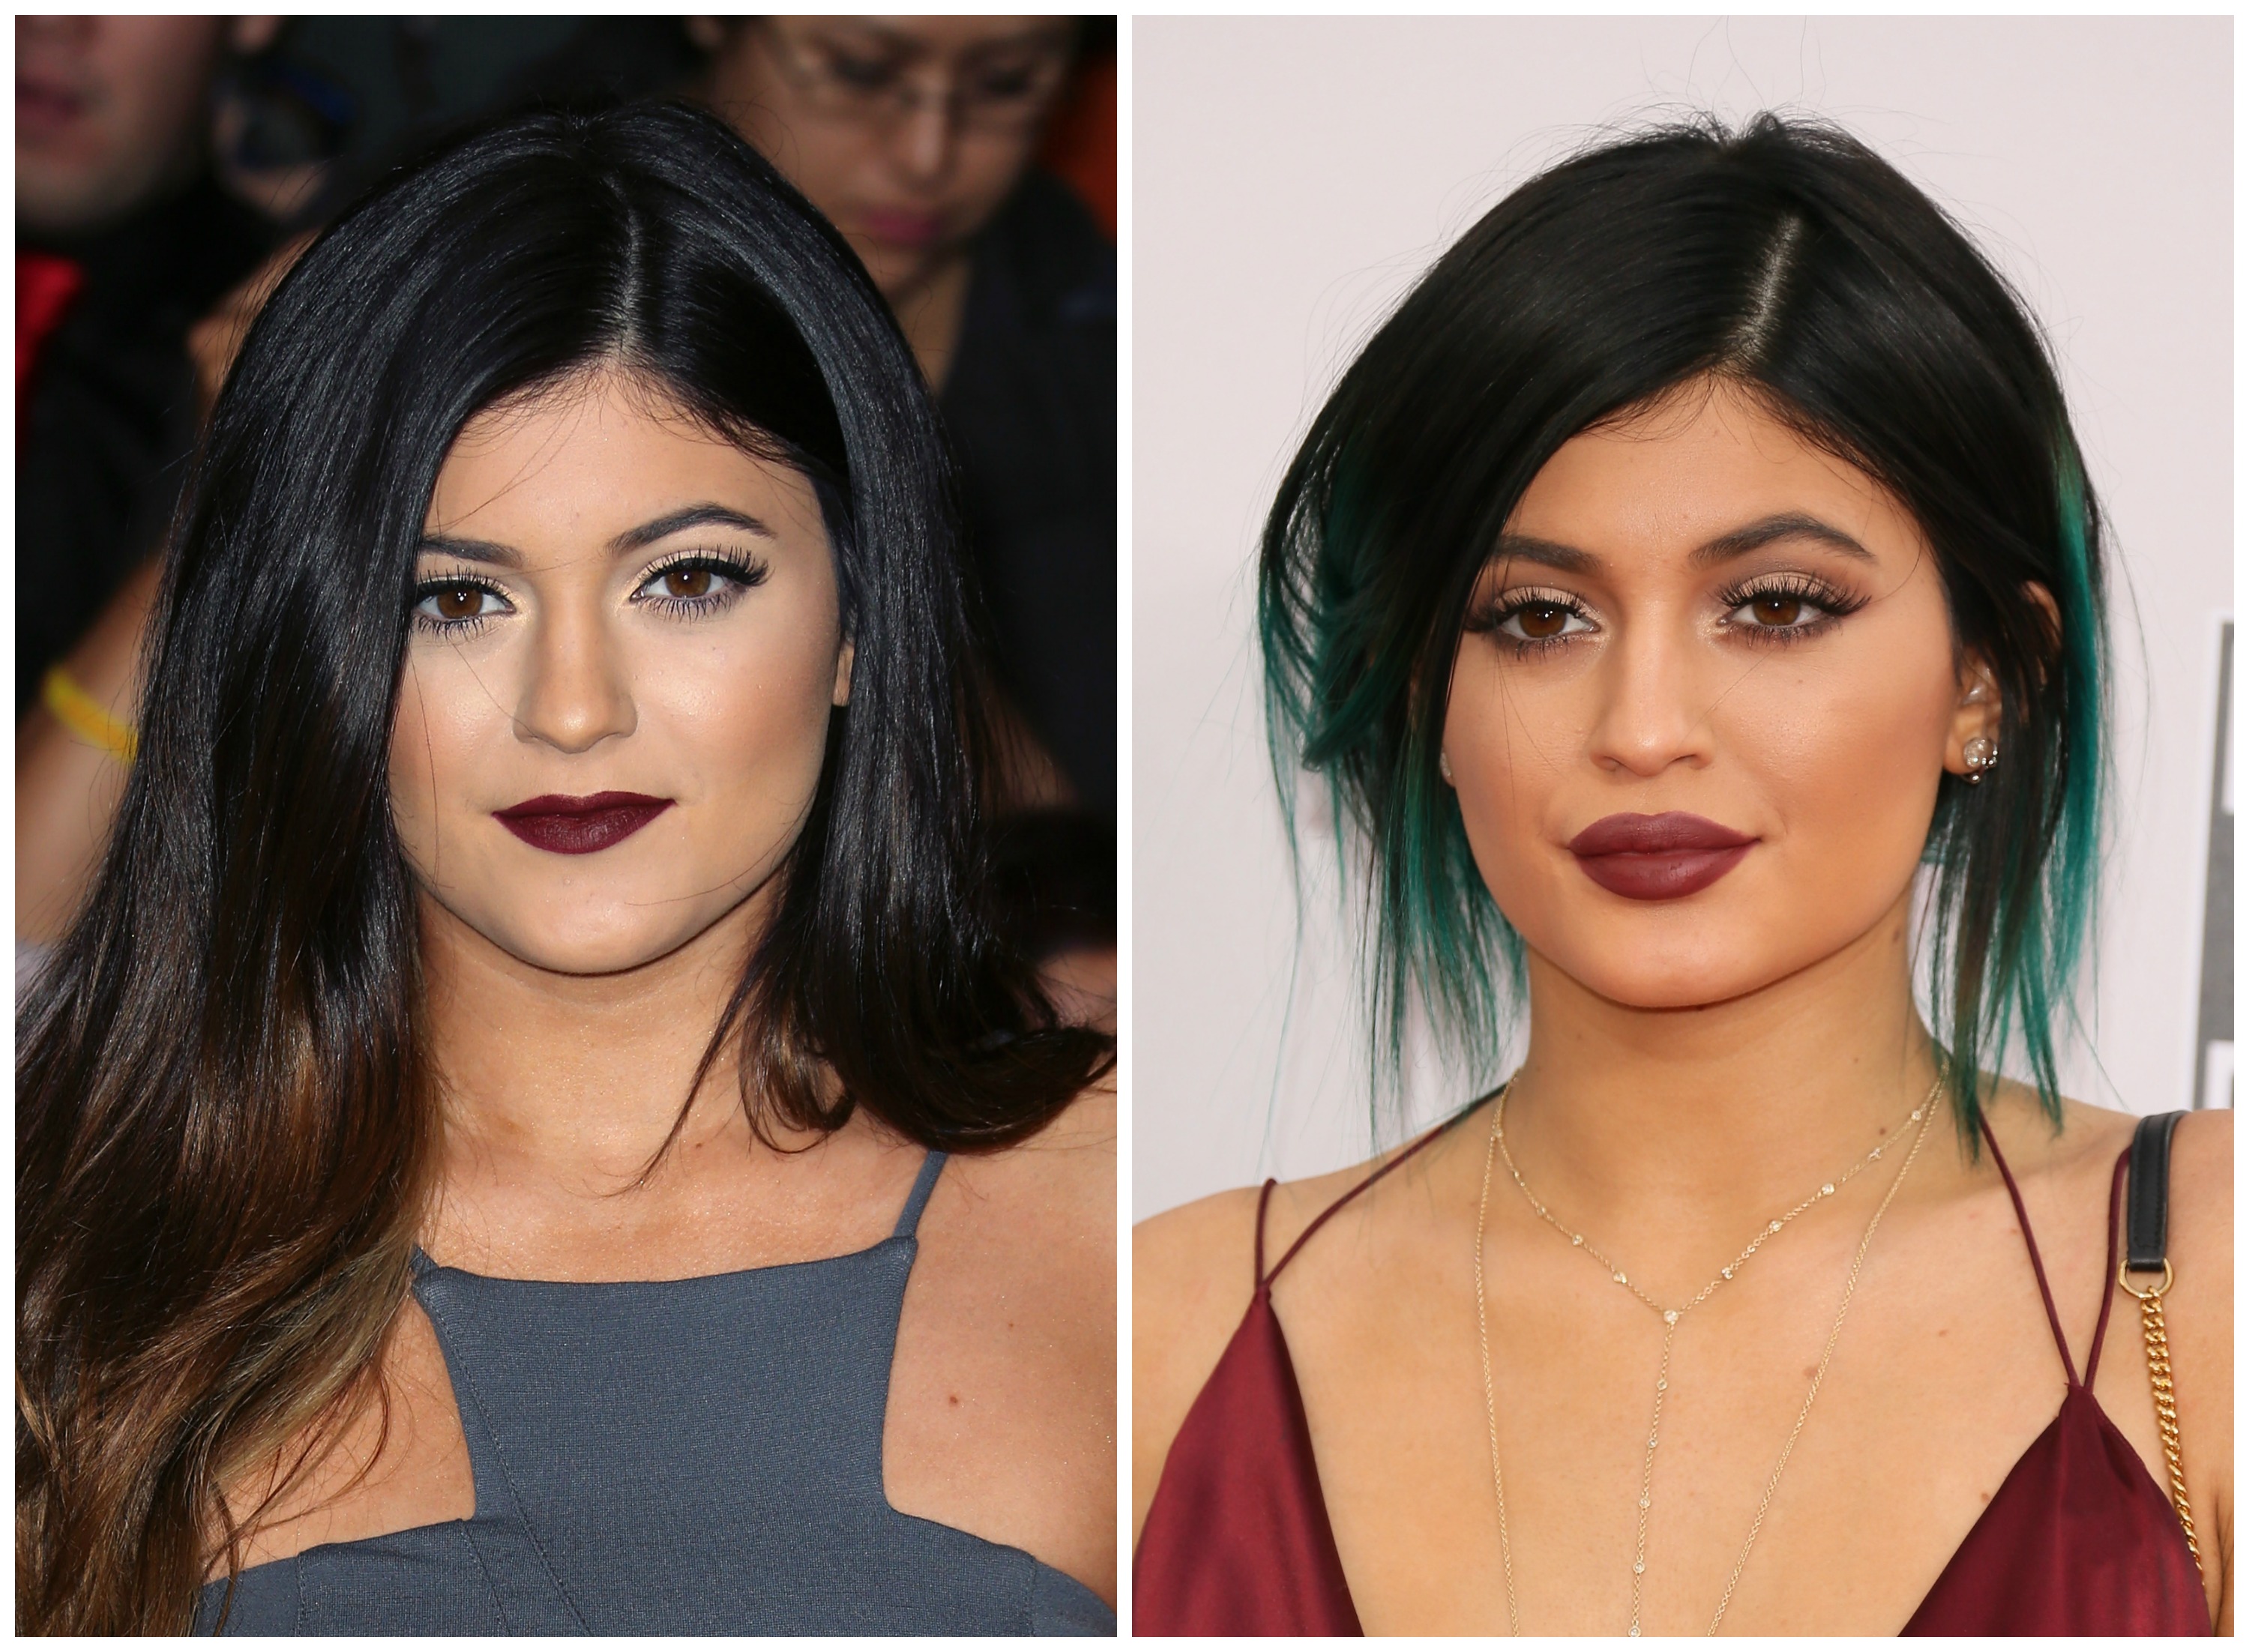 Mount And Blade: kylie jenner body before plastic surgery